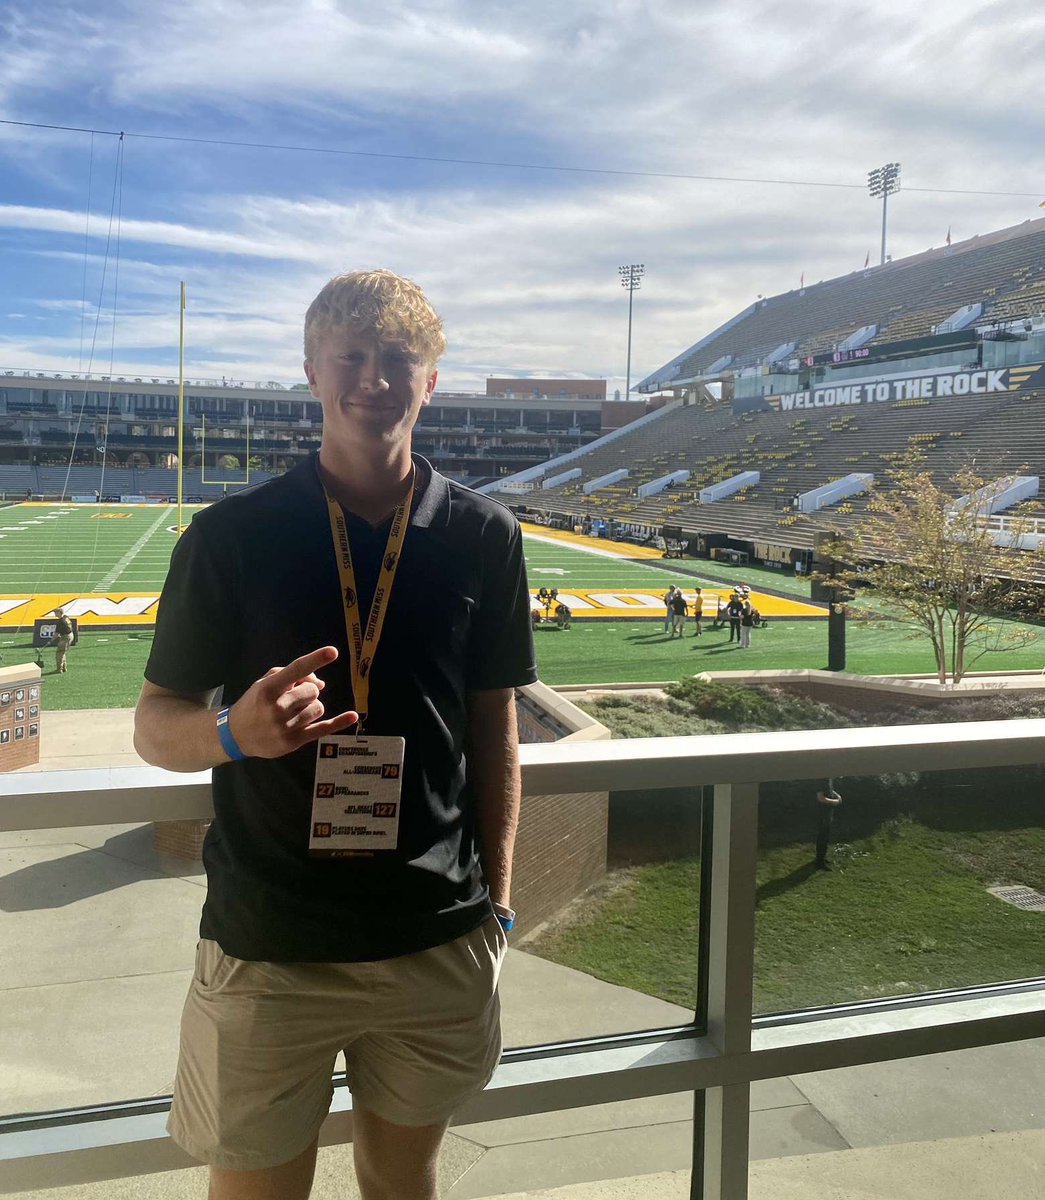 Great visit @SouthernMissFB yesterday and @Coach_GMeyer21 thank you for the hospitality. Great game @astein8!
#SMTTT🦅🖤💛 #GeauxEagles

@Mandeville_FB @HKA_Tanalski @Briggs_bourg @Coach_Hall7  @_USMrecruiting